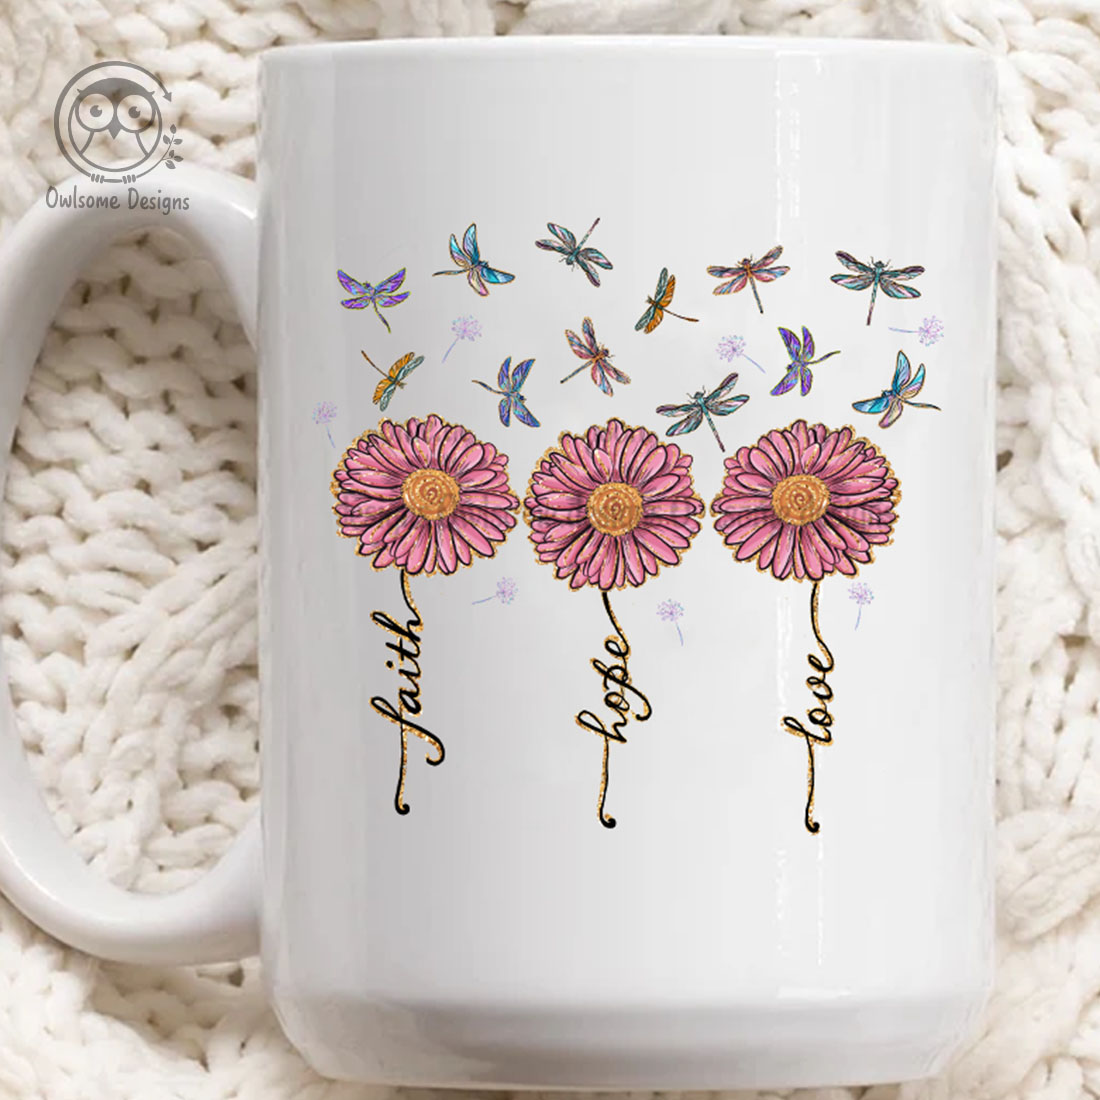 Cup image with unique dragonfly print and flowers.